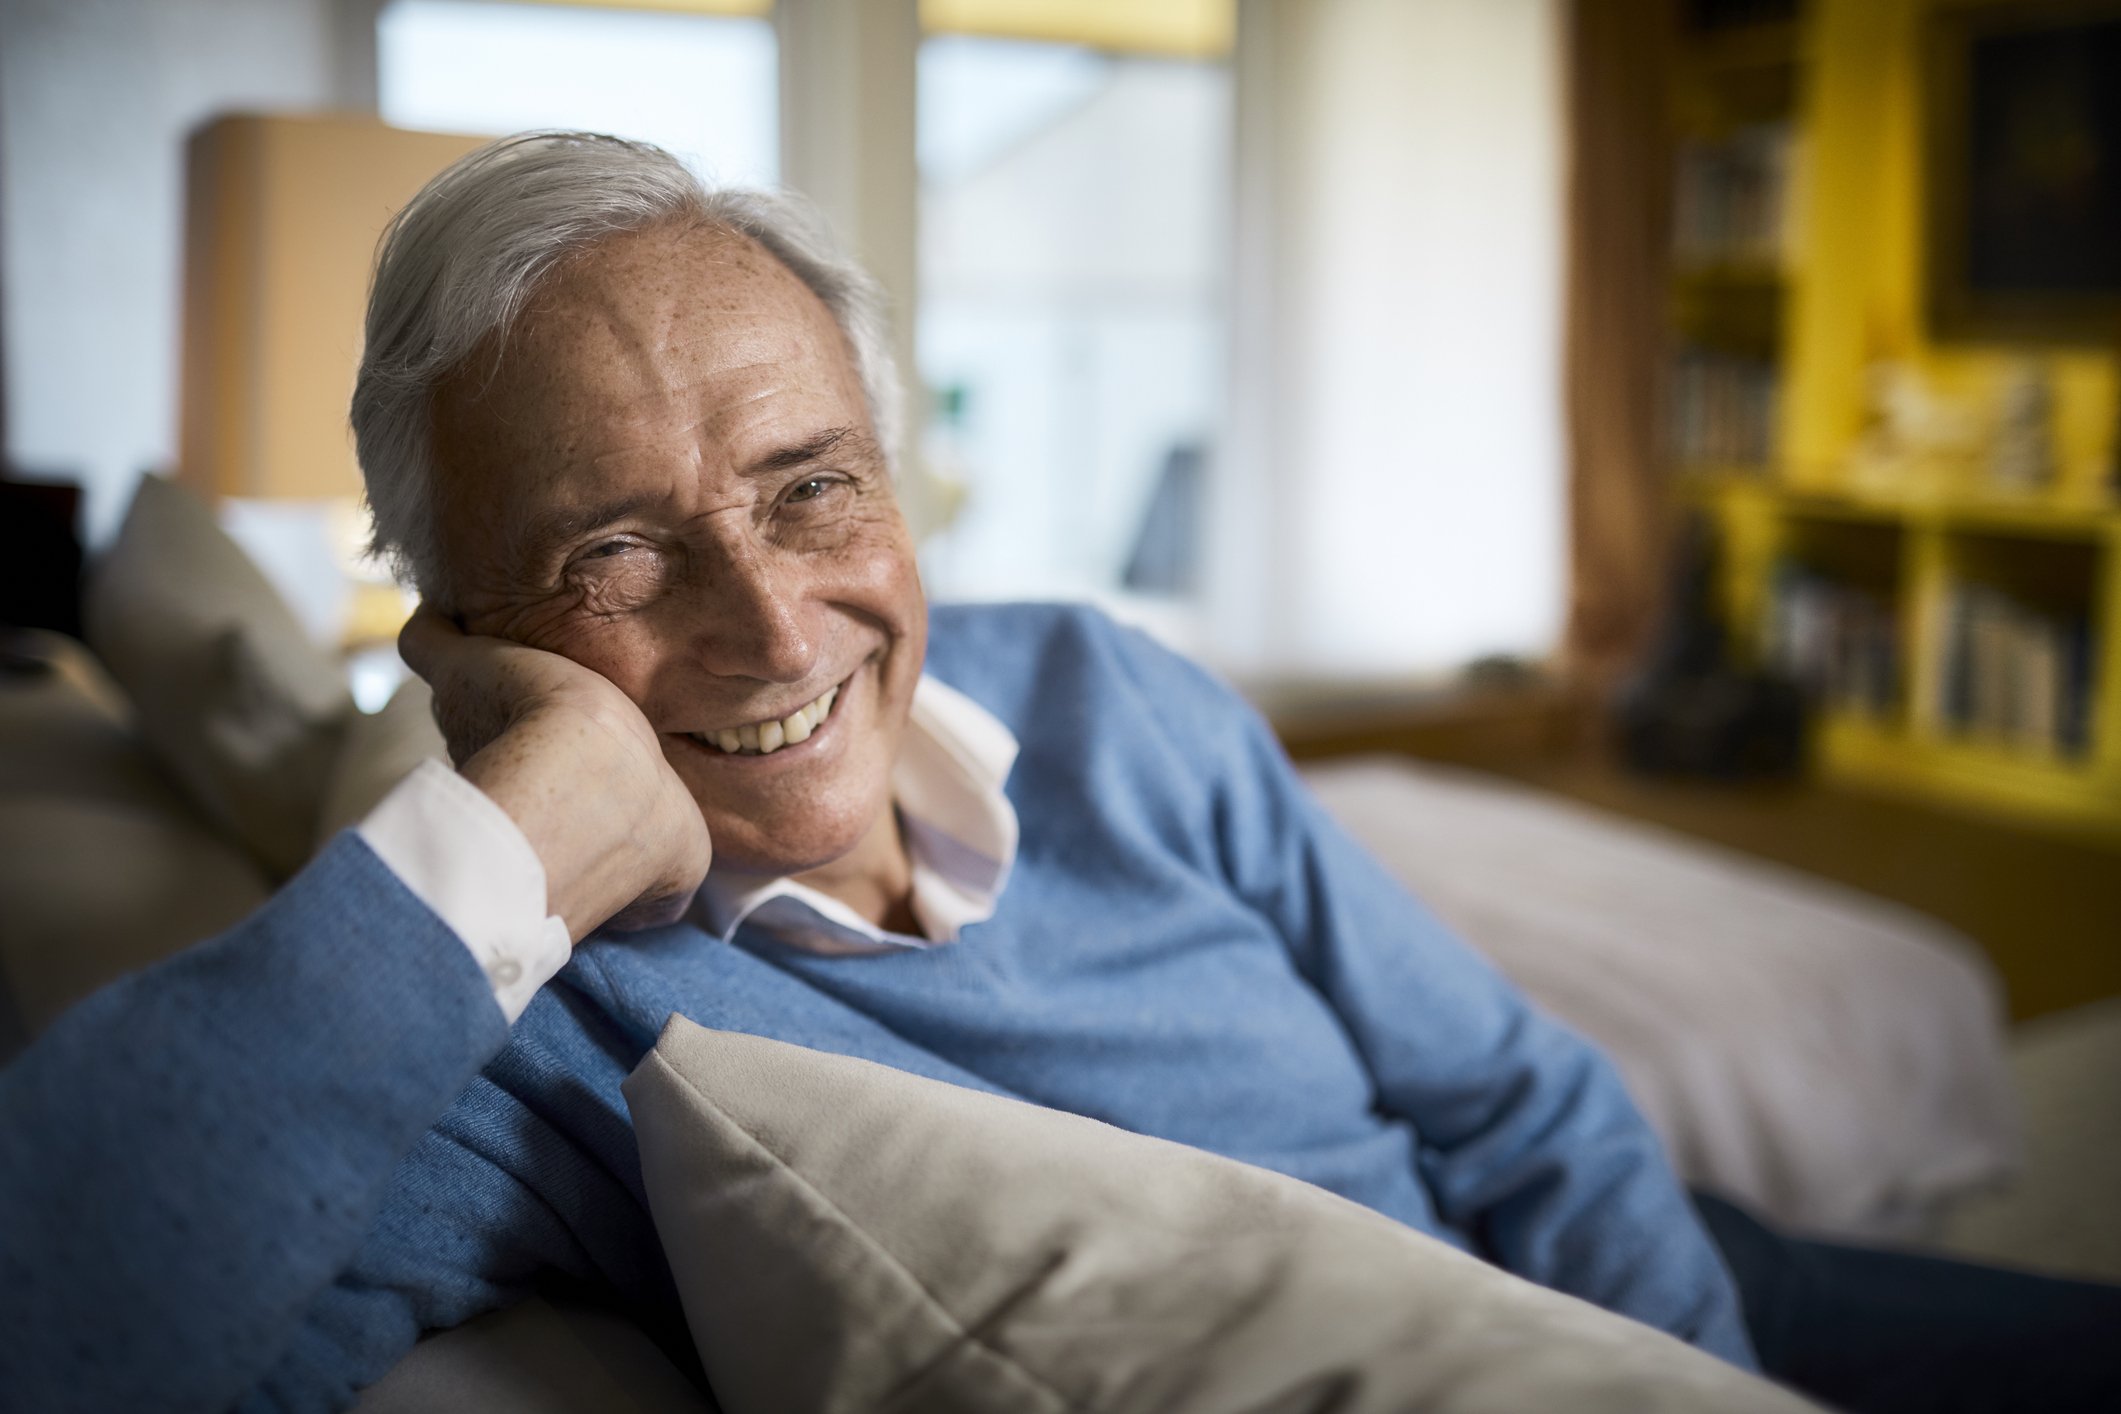 An elderly man grinning from a sofa | Photo: Pexels